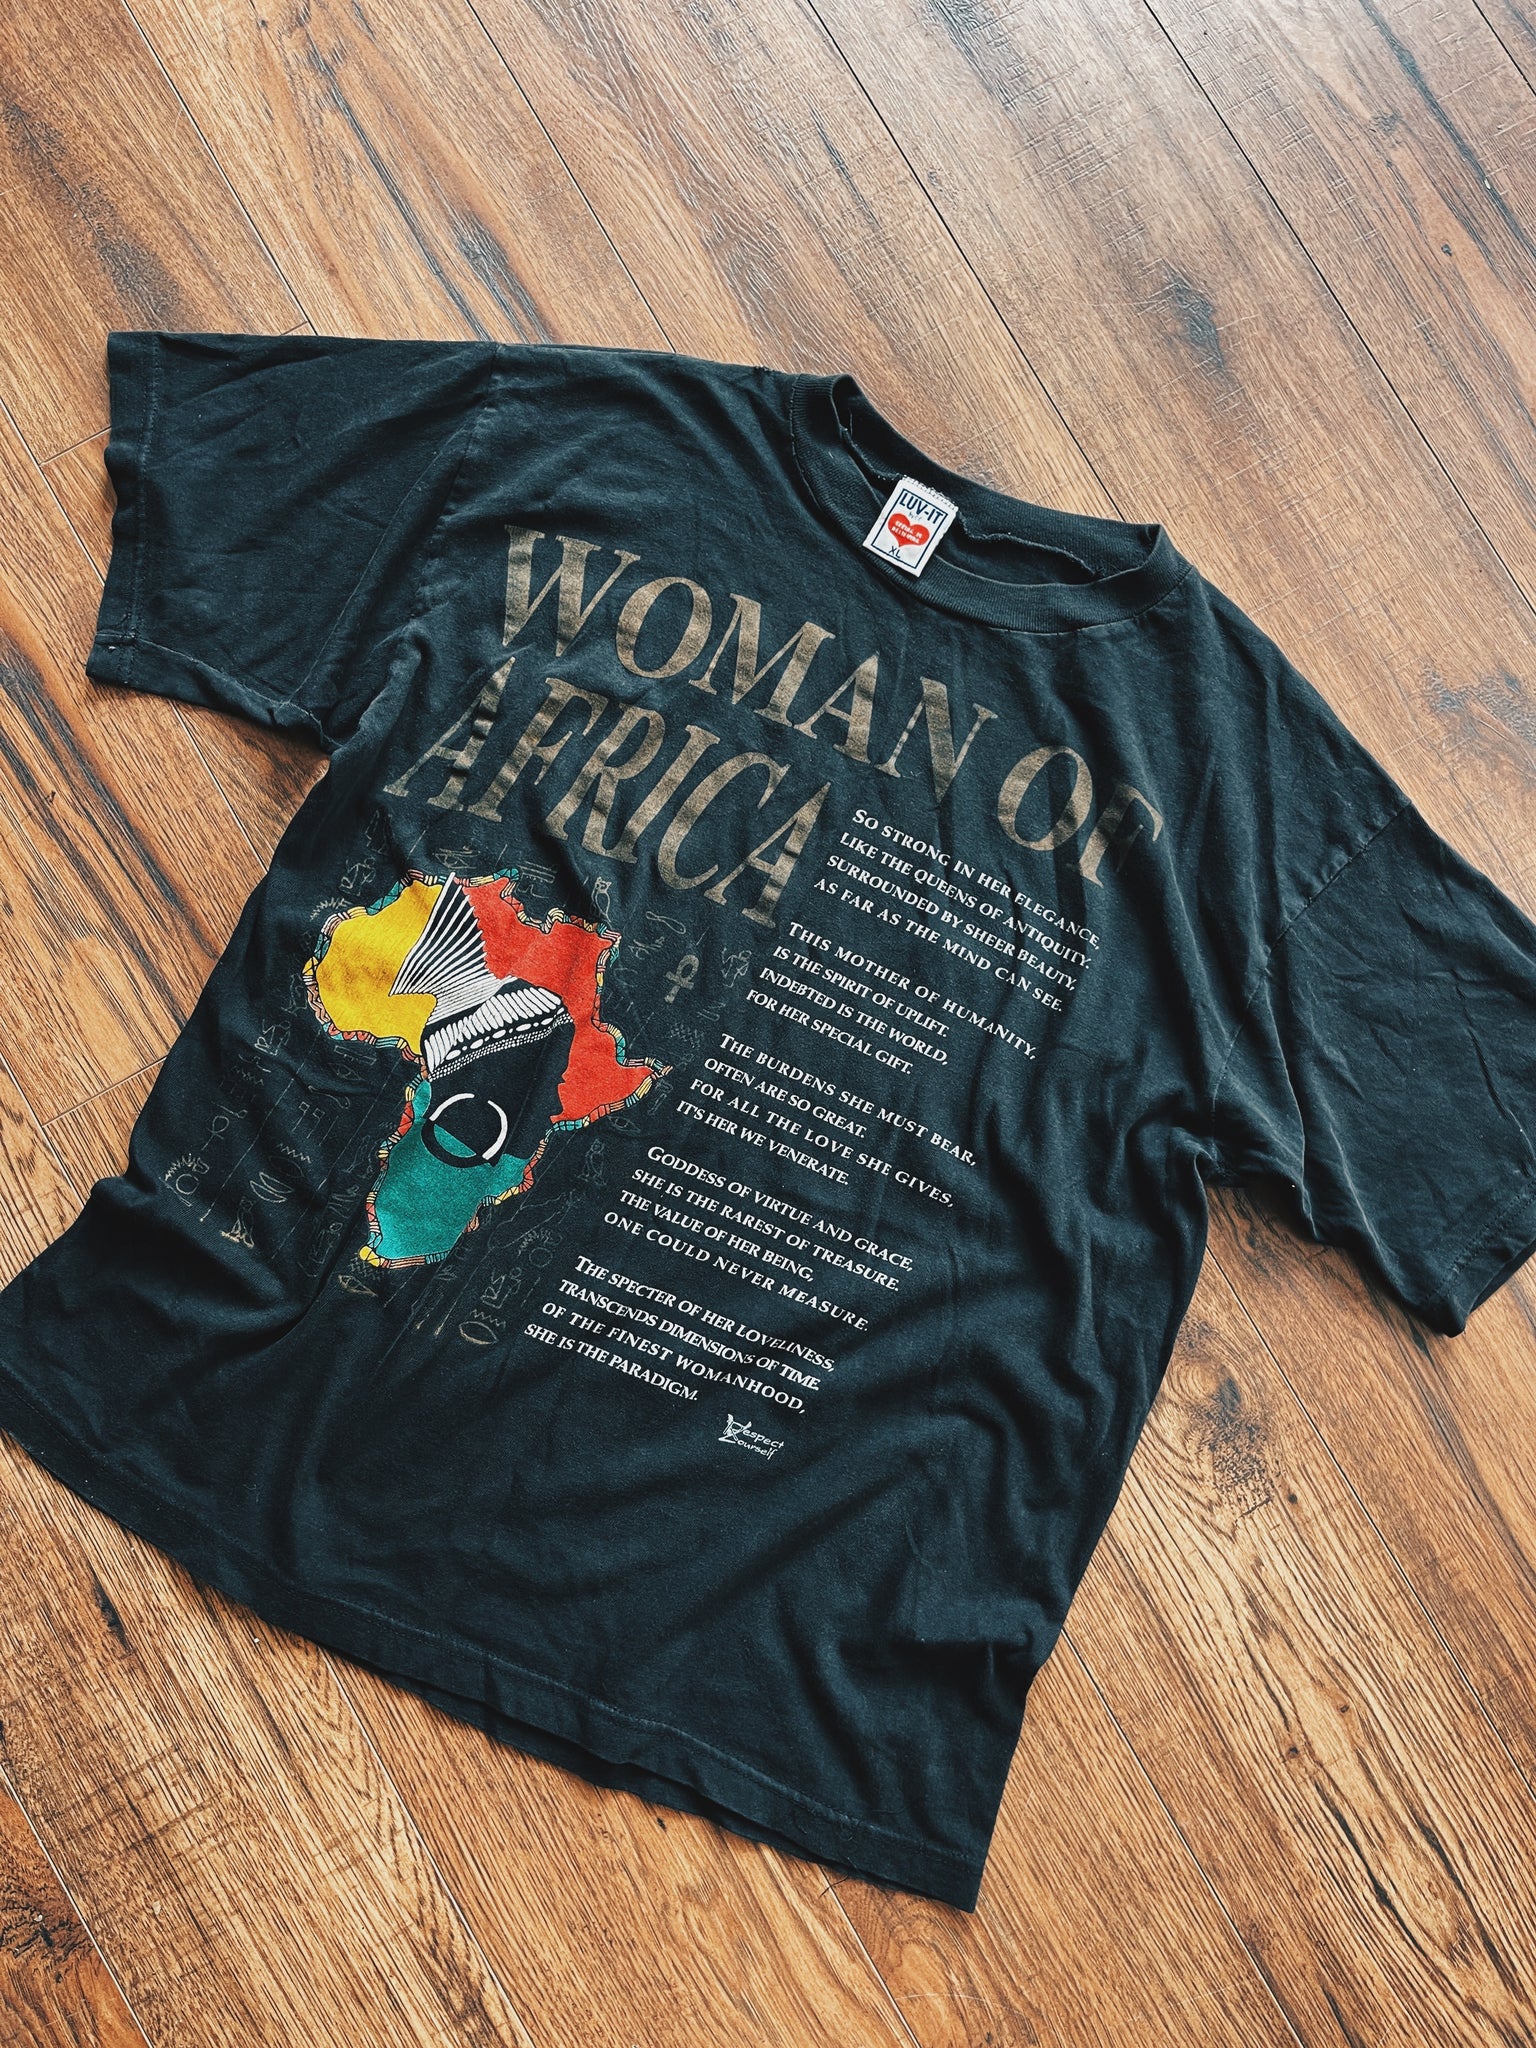 Vintage "Woman of Africa" T-Shirt (1990's)